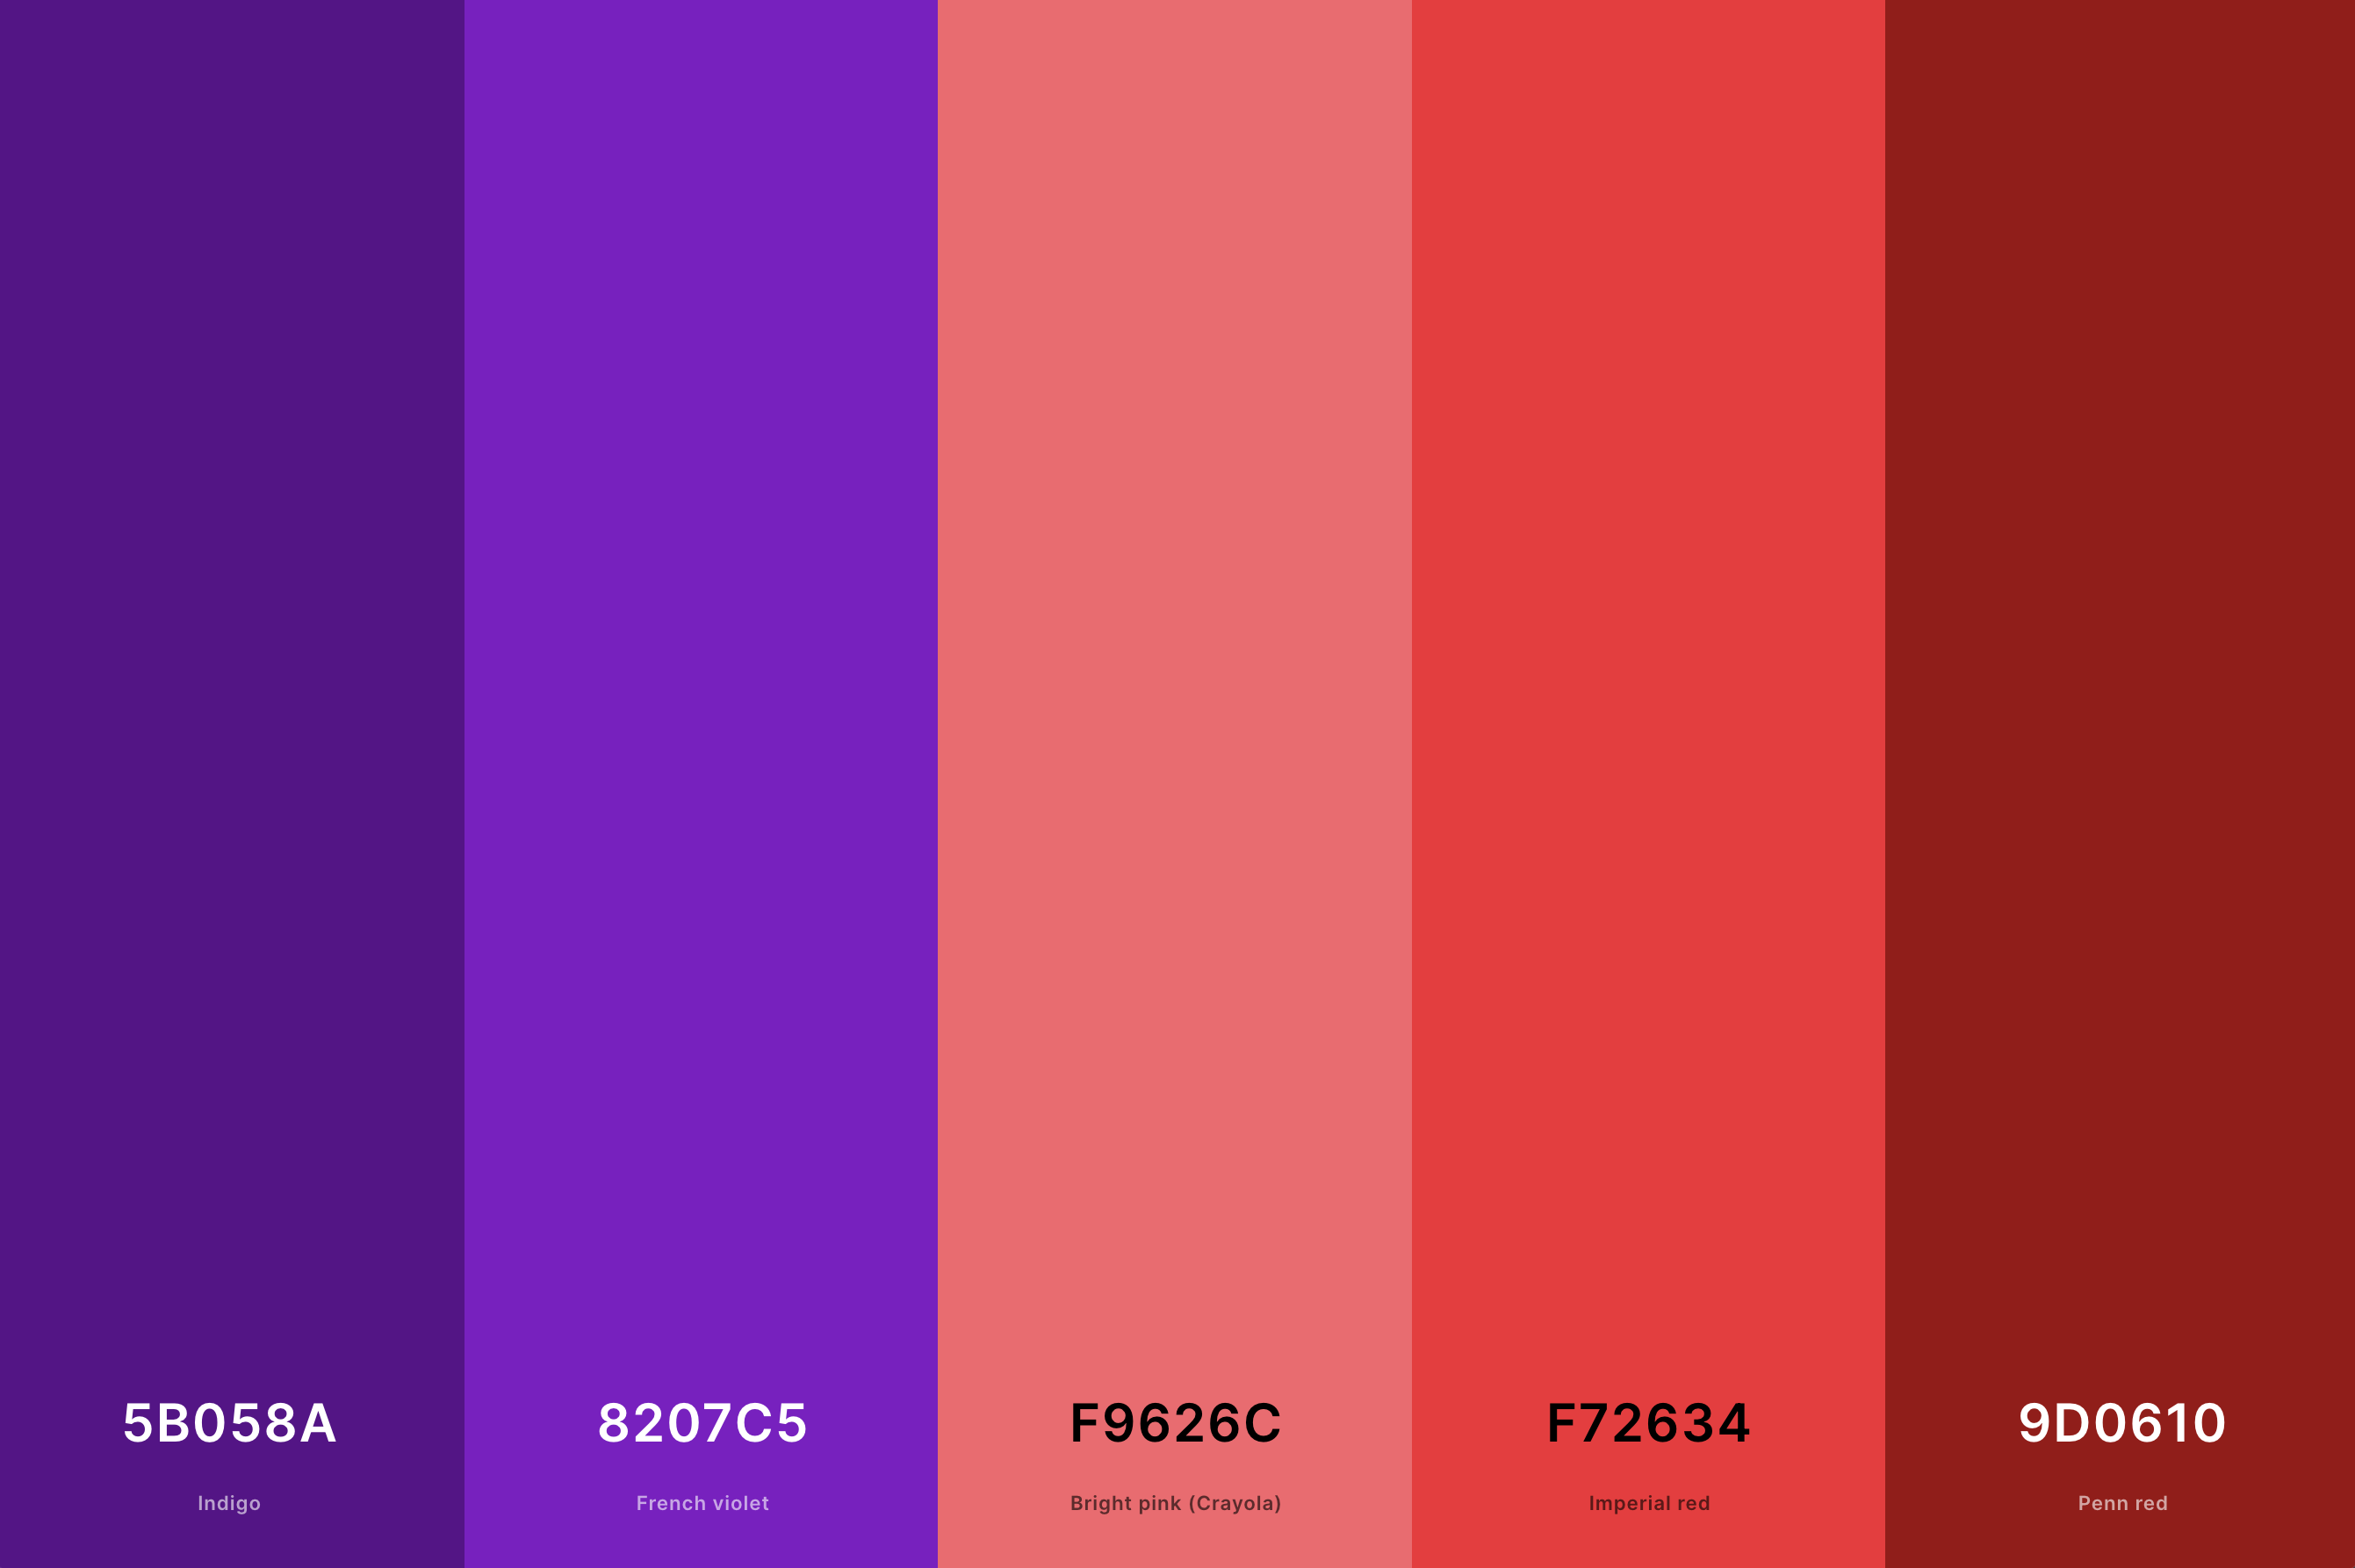 10. Red And Purple Color Palette Color Palette with Indigo (Hex #5B058A) + French Violet (Hex #8207C5) + Bright Pink (Crayola) (Hex #F9626C) + Imperial Red (Hex #F72634) + Penn Red (Hex #9D0610) Color Palette with Hex Codes